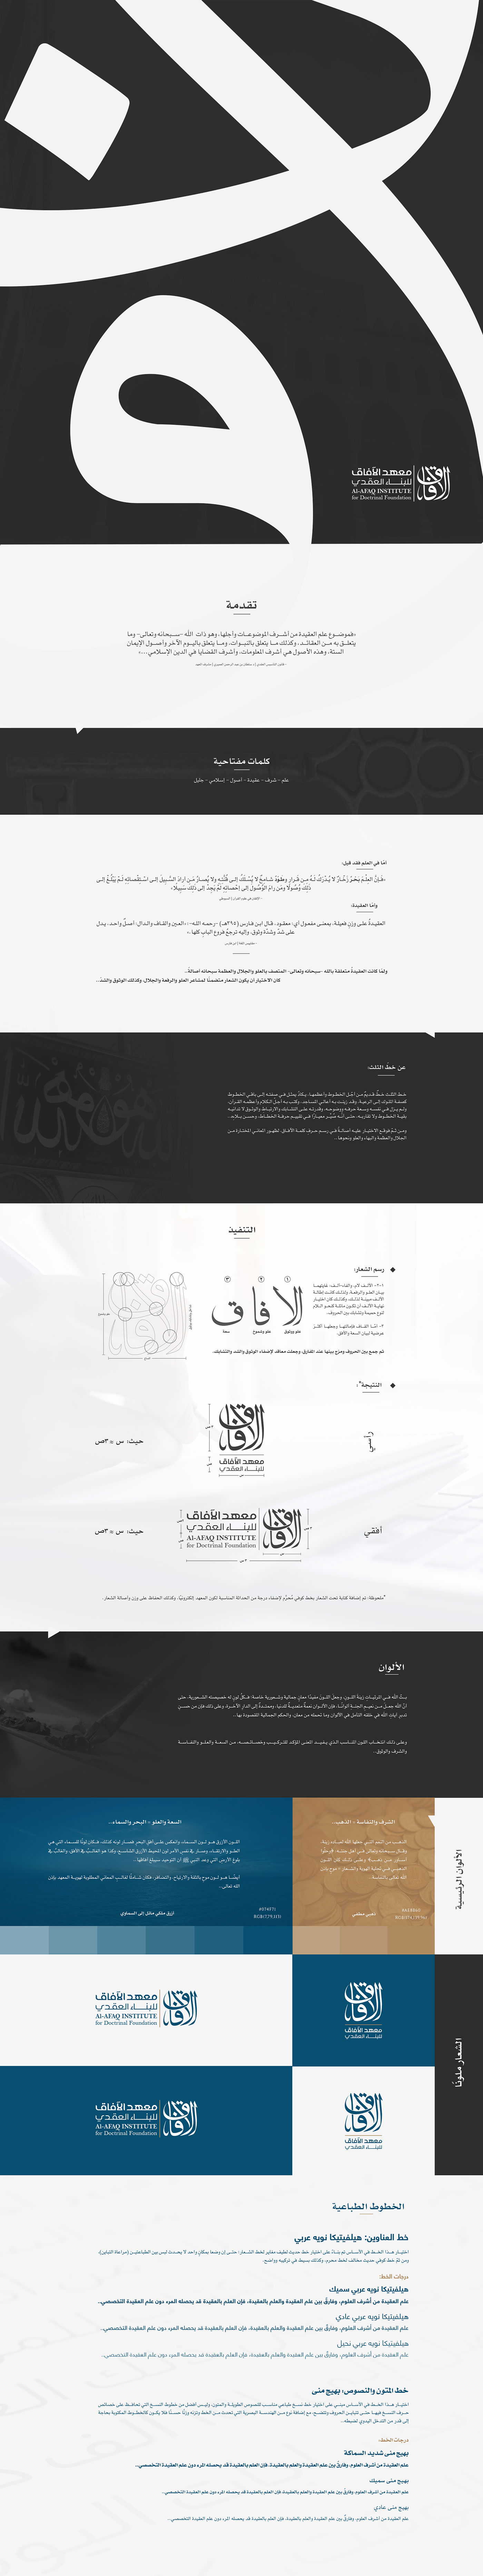 arabic Calligraphy   design Education identity islamic motion thuluth traditional typography  